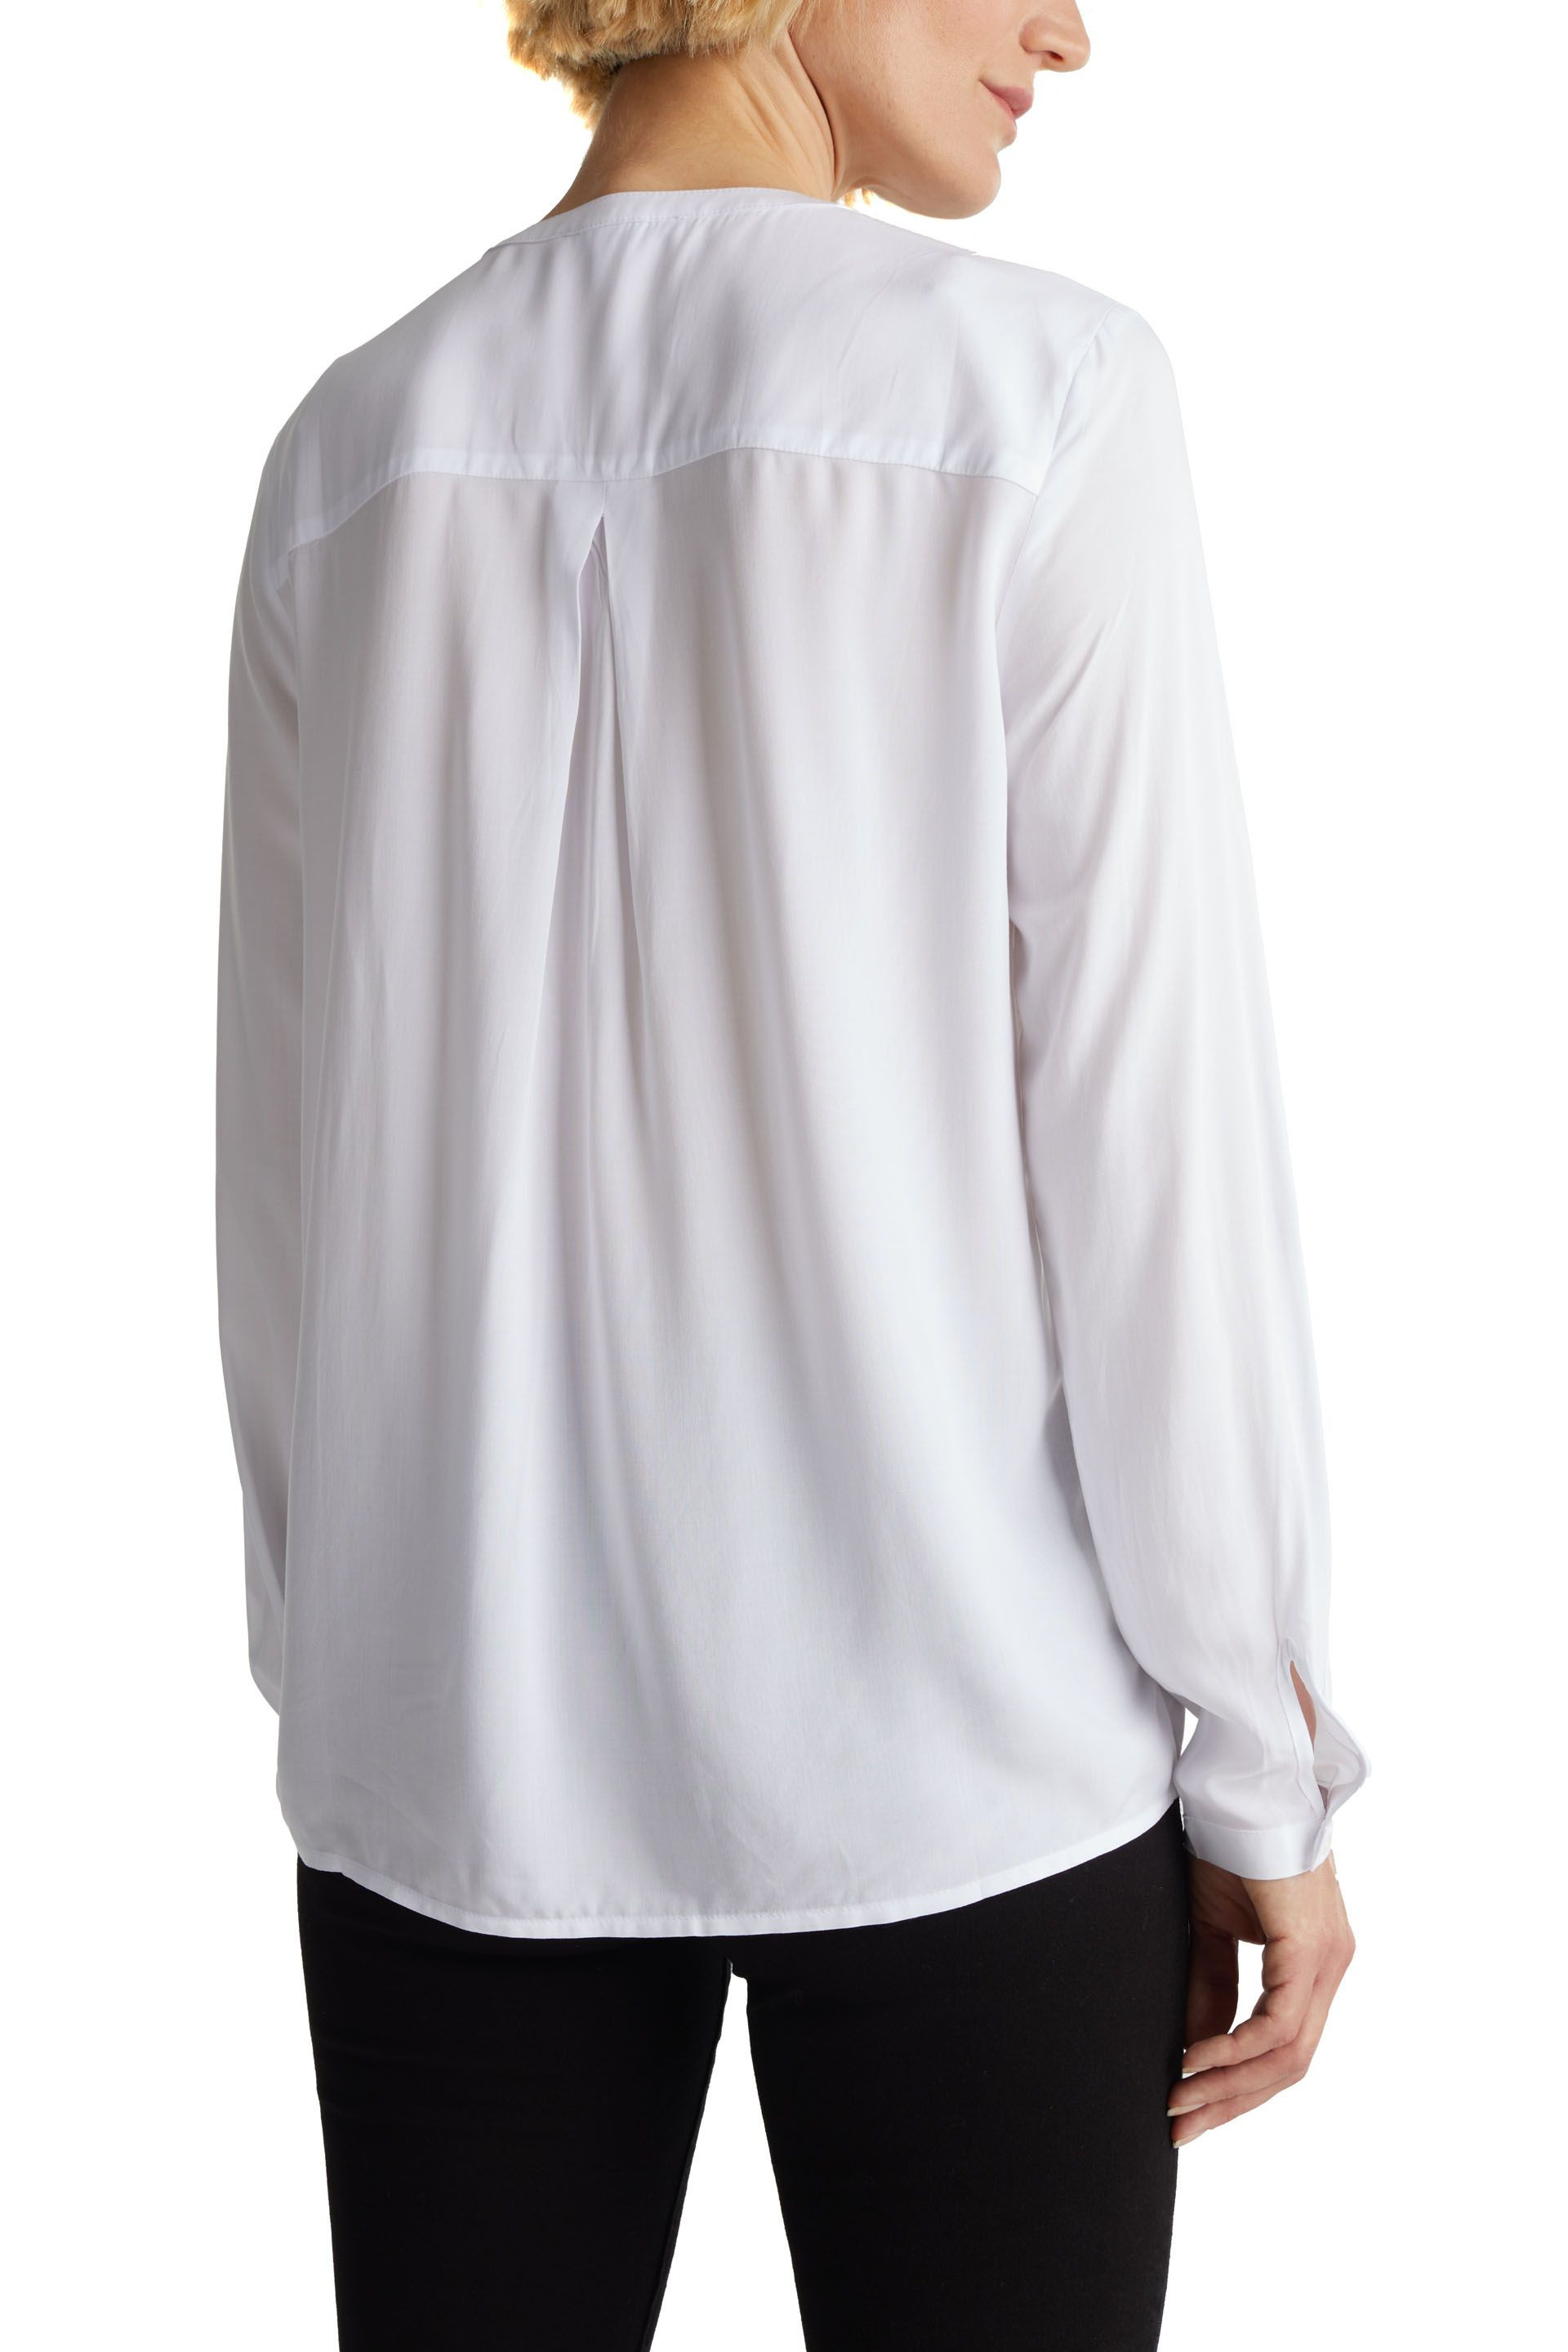 Blouse with adjustable sleeves, White, large image number 2